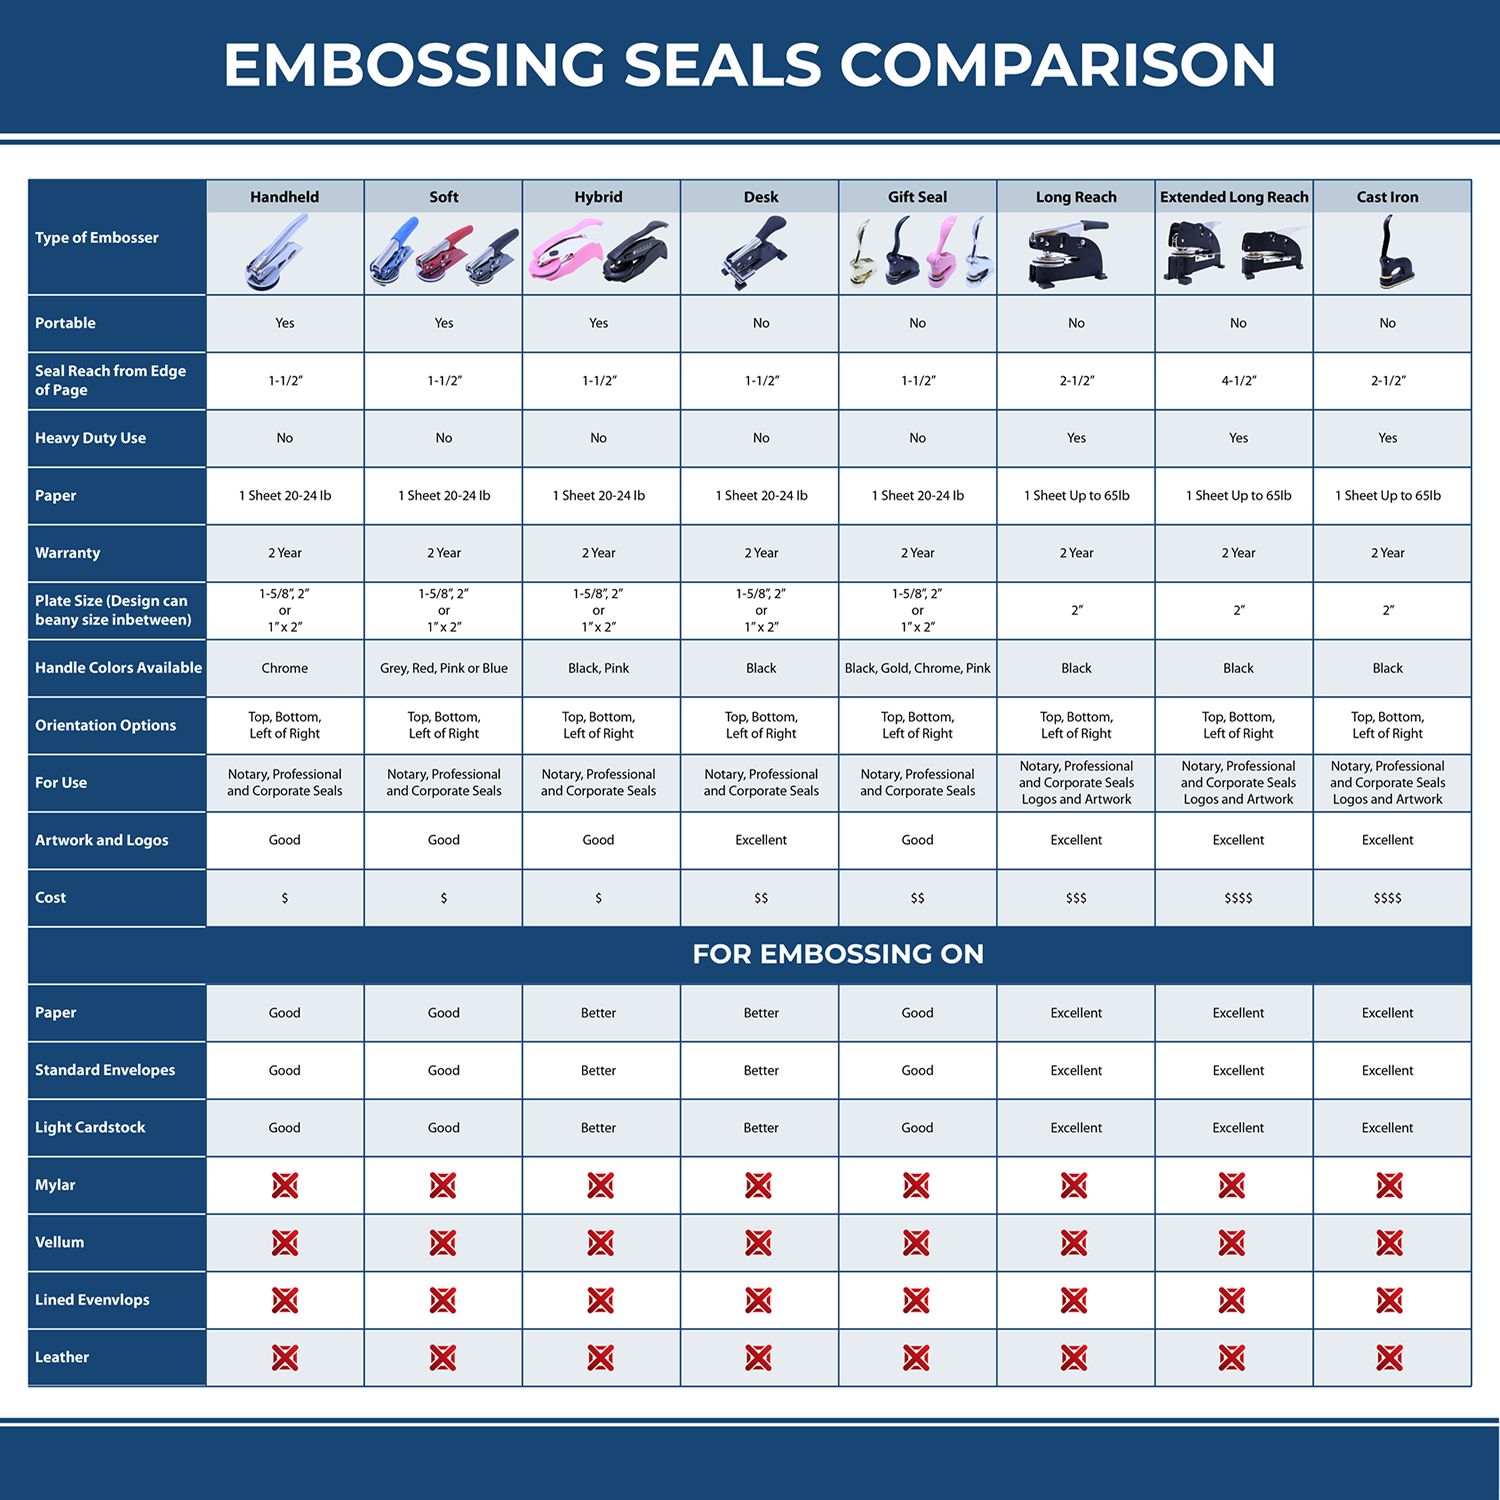 A comparison chart for the different types of mount models available for the Long Reach New Mexico Land Surveyor Seal.